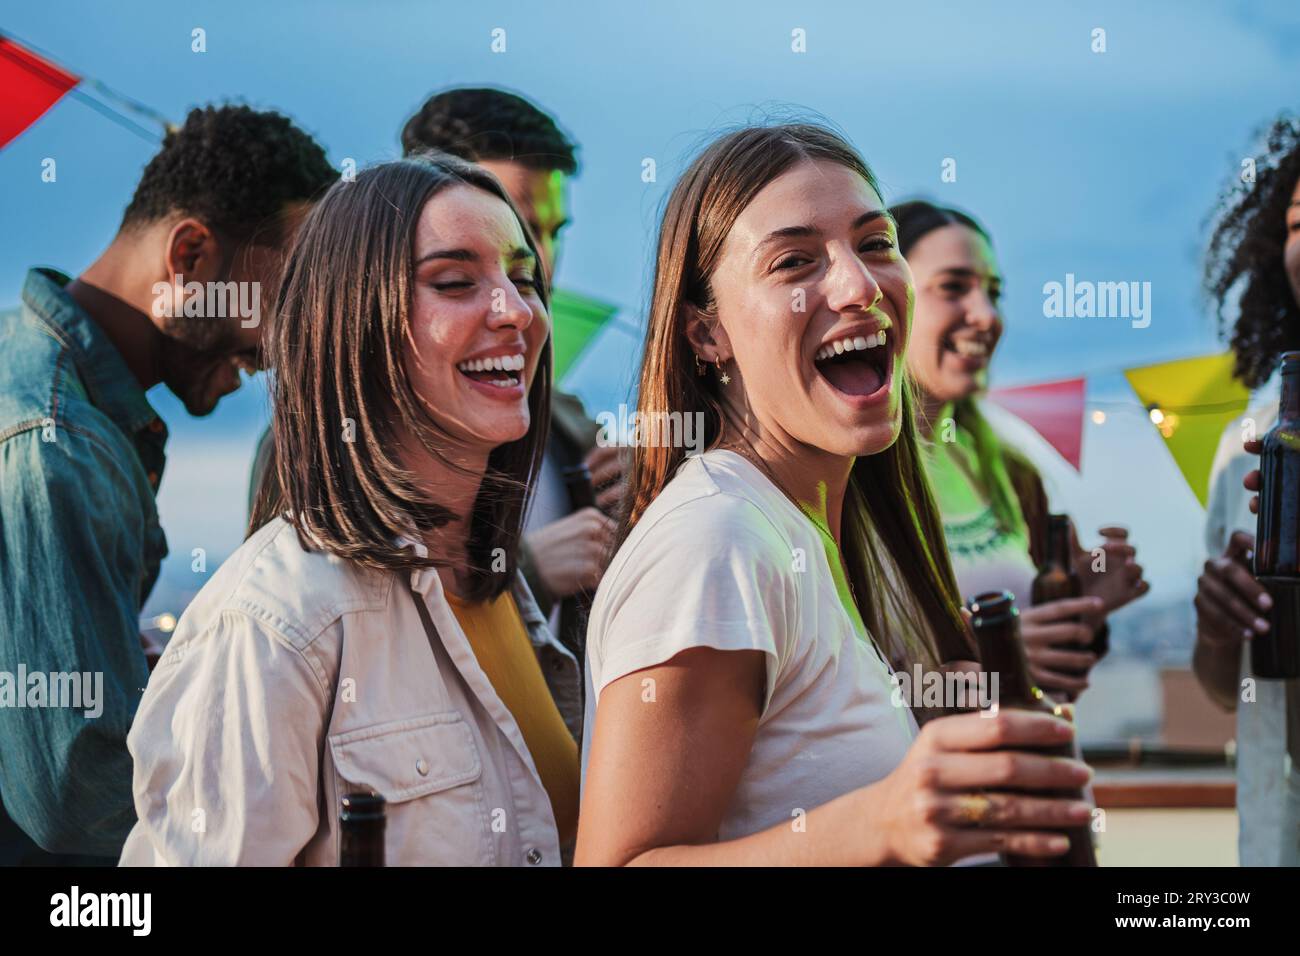 Two excited young adult women dancing together and having fun with friends at music festival. Ecstatic teenage girls celebrating with music on a weekend party. Playful ladies enjoying a birthday event. High quality photo Stock Photo